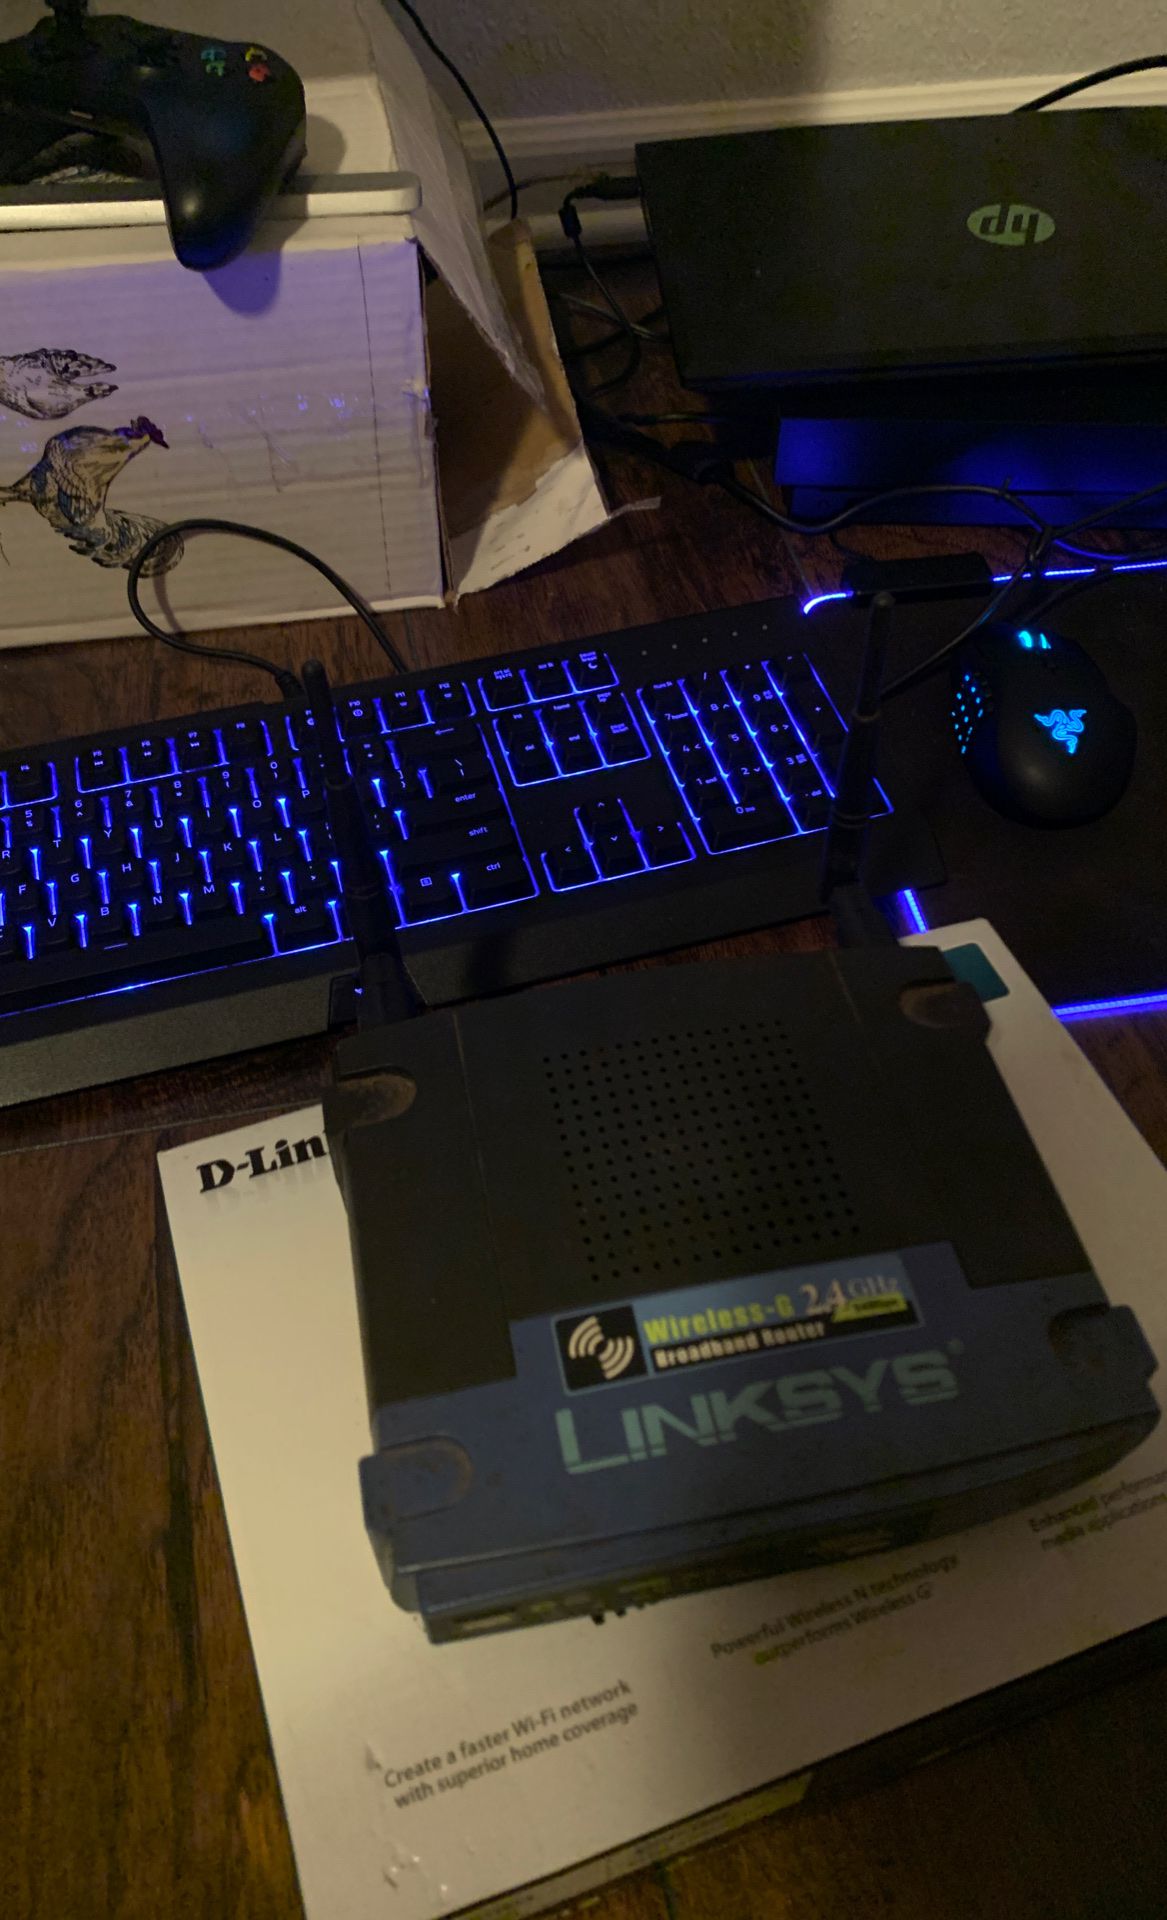 LinkSys Router With D-Link box